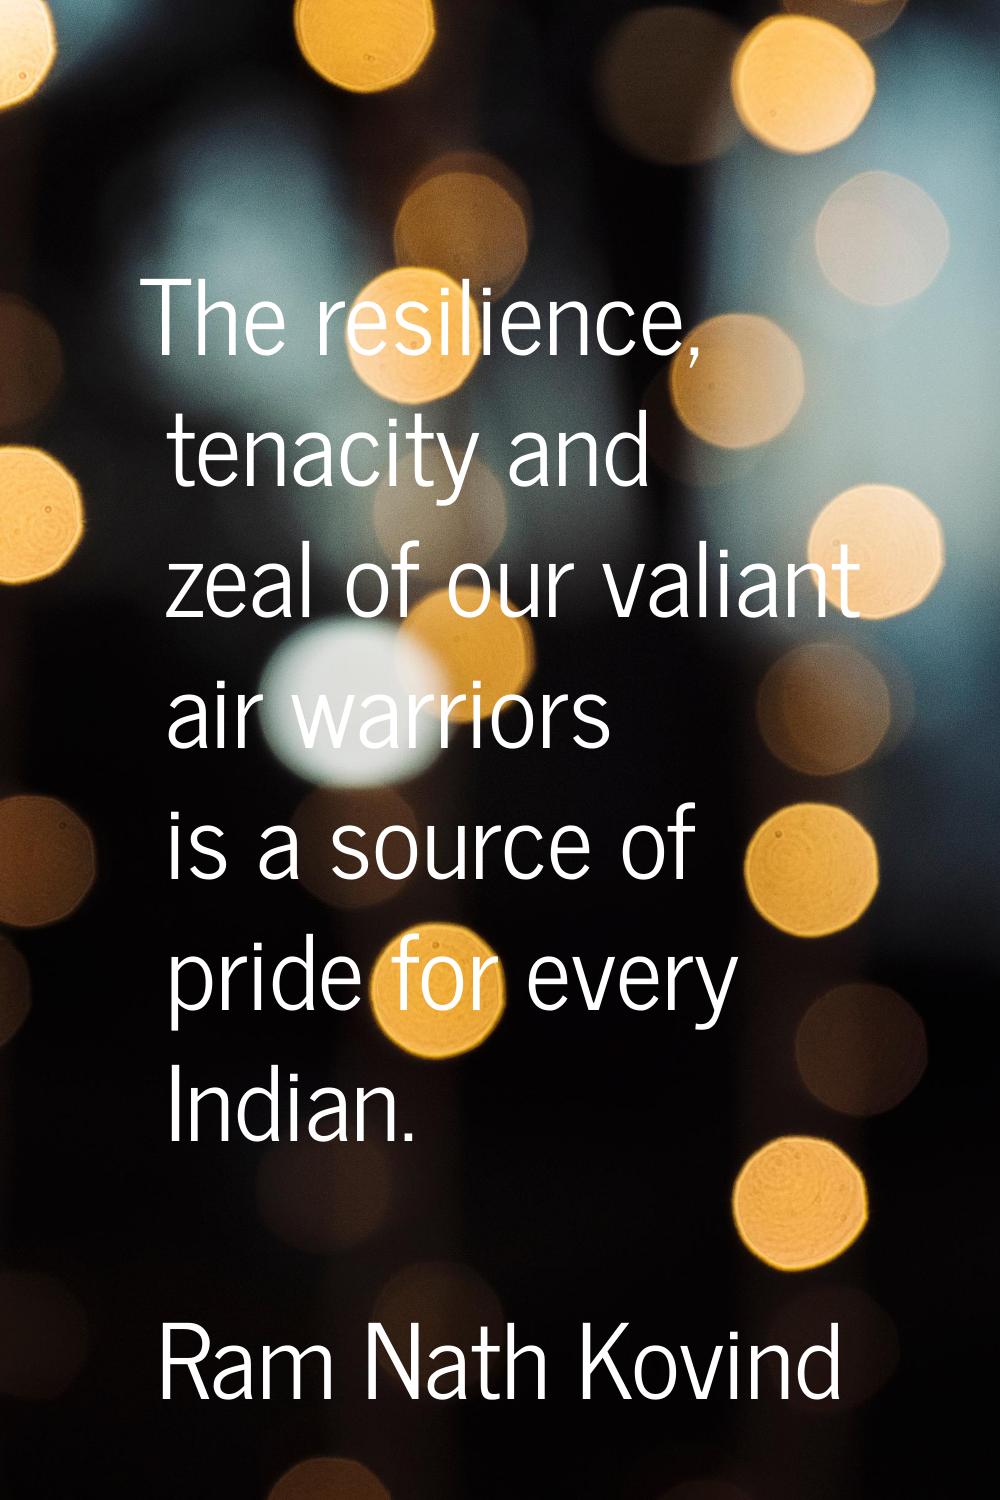 The resilience, tenacity and zeal of our valiant air warriors is a source of pride for every Indian